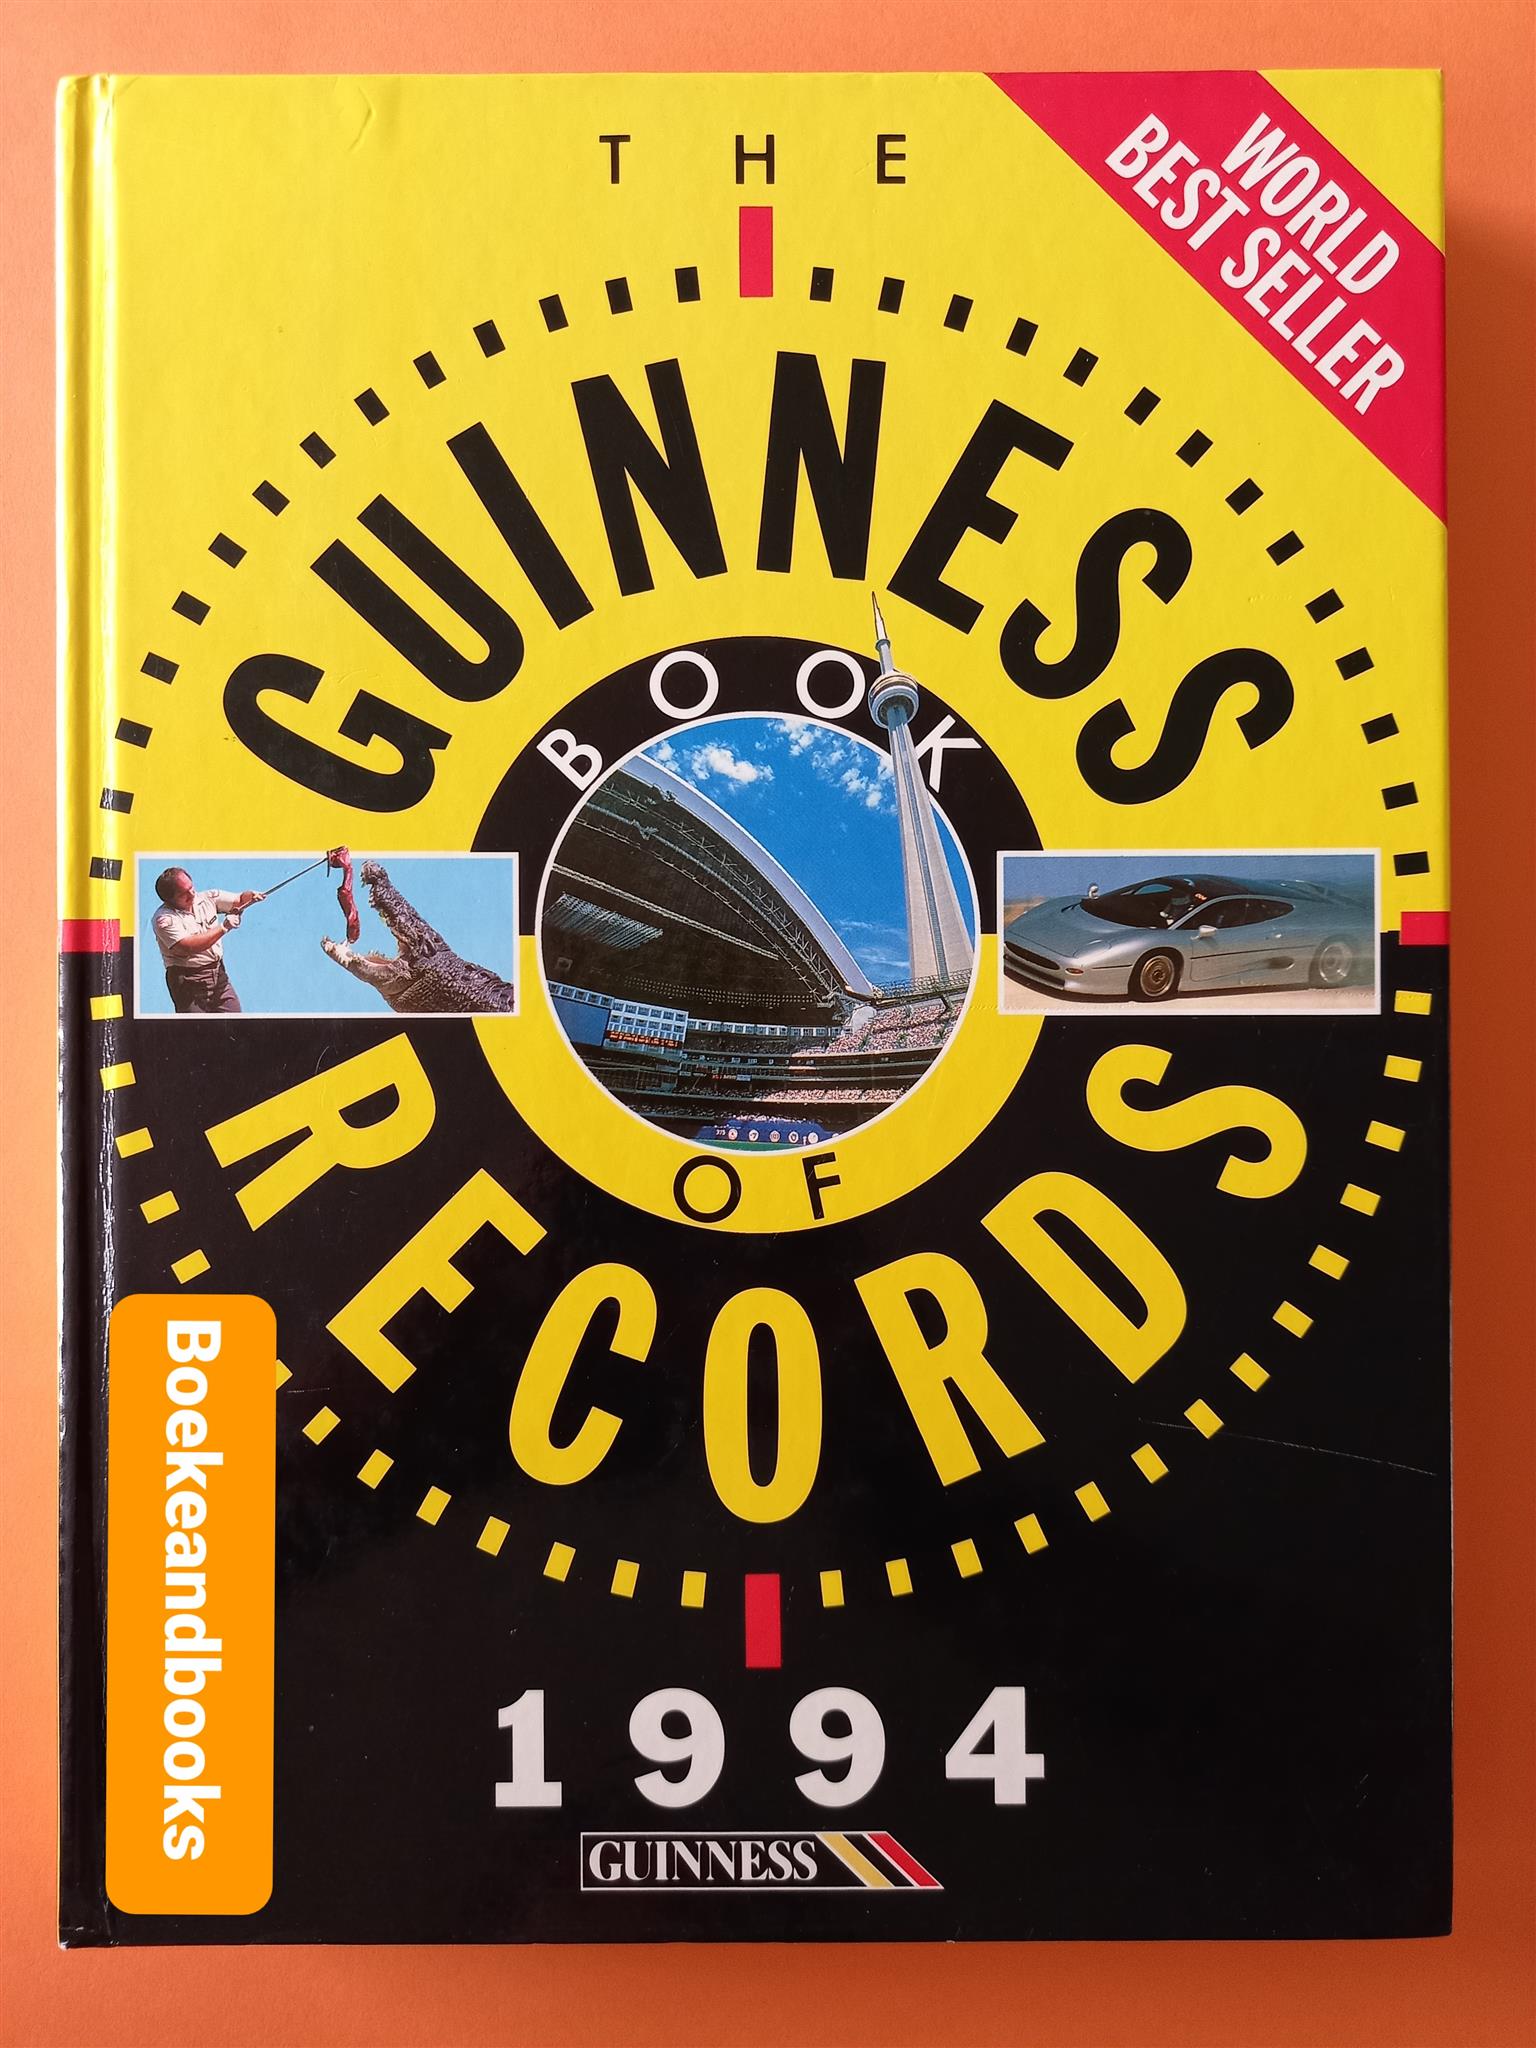 The Guinness Book Of Records 1994.